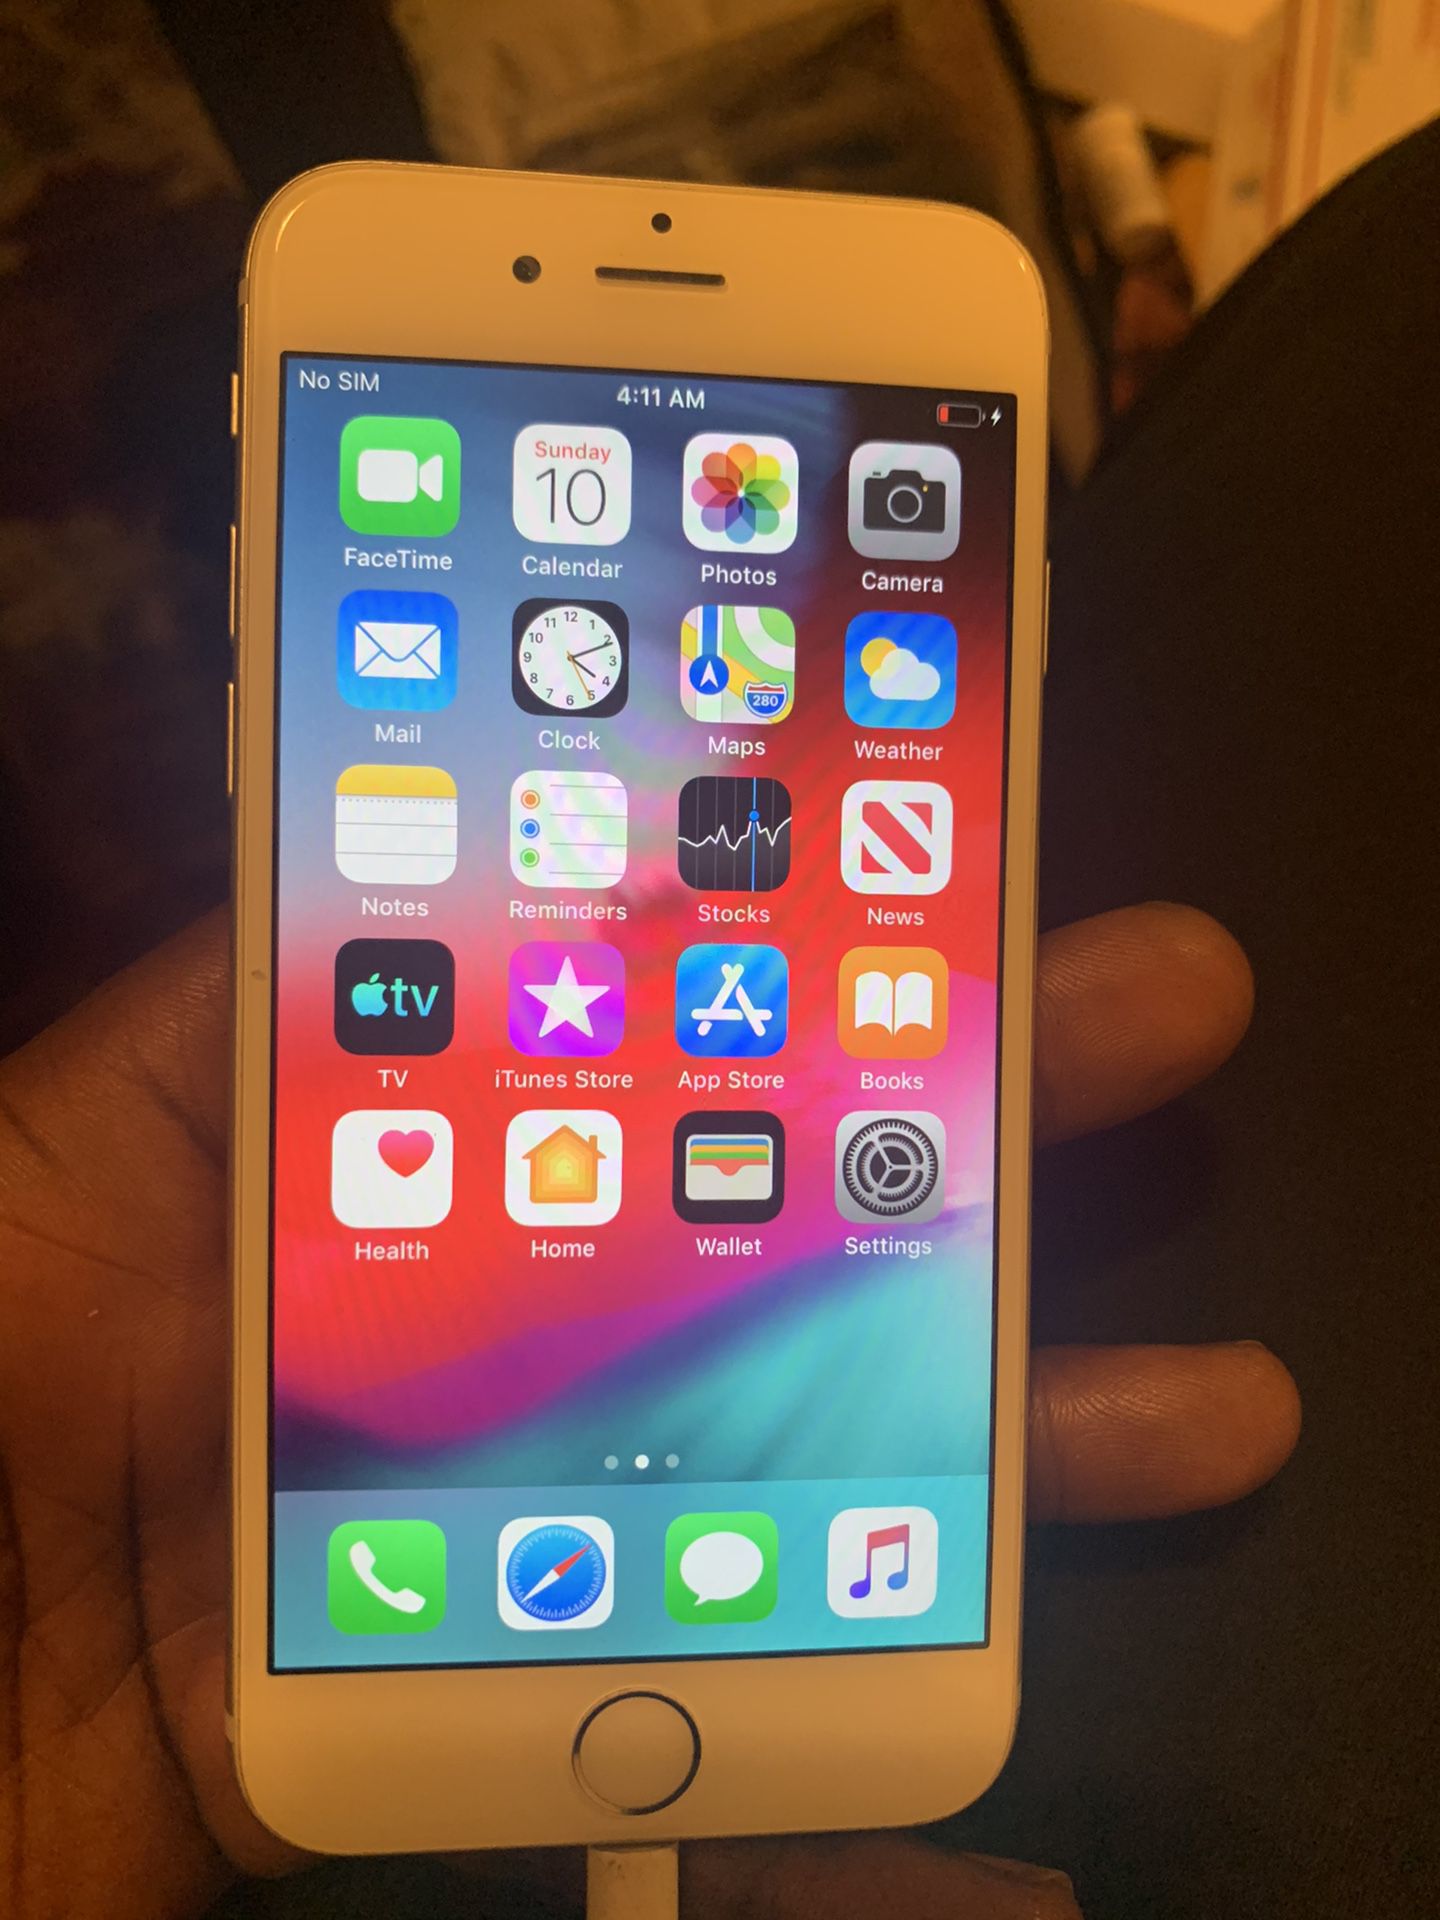 iPhone 6 unlocked any carrier